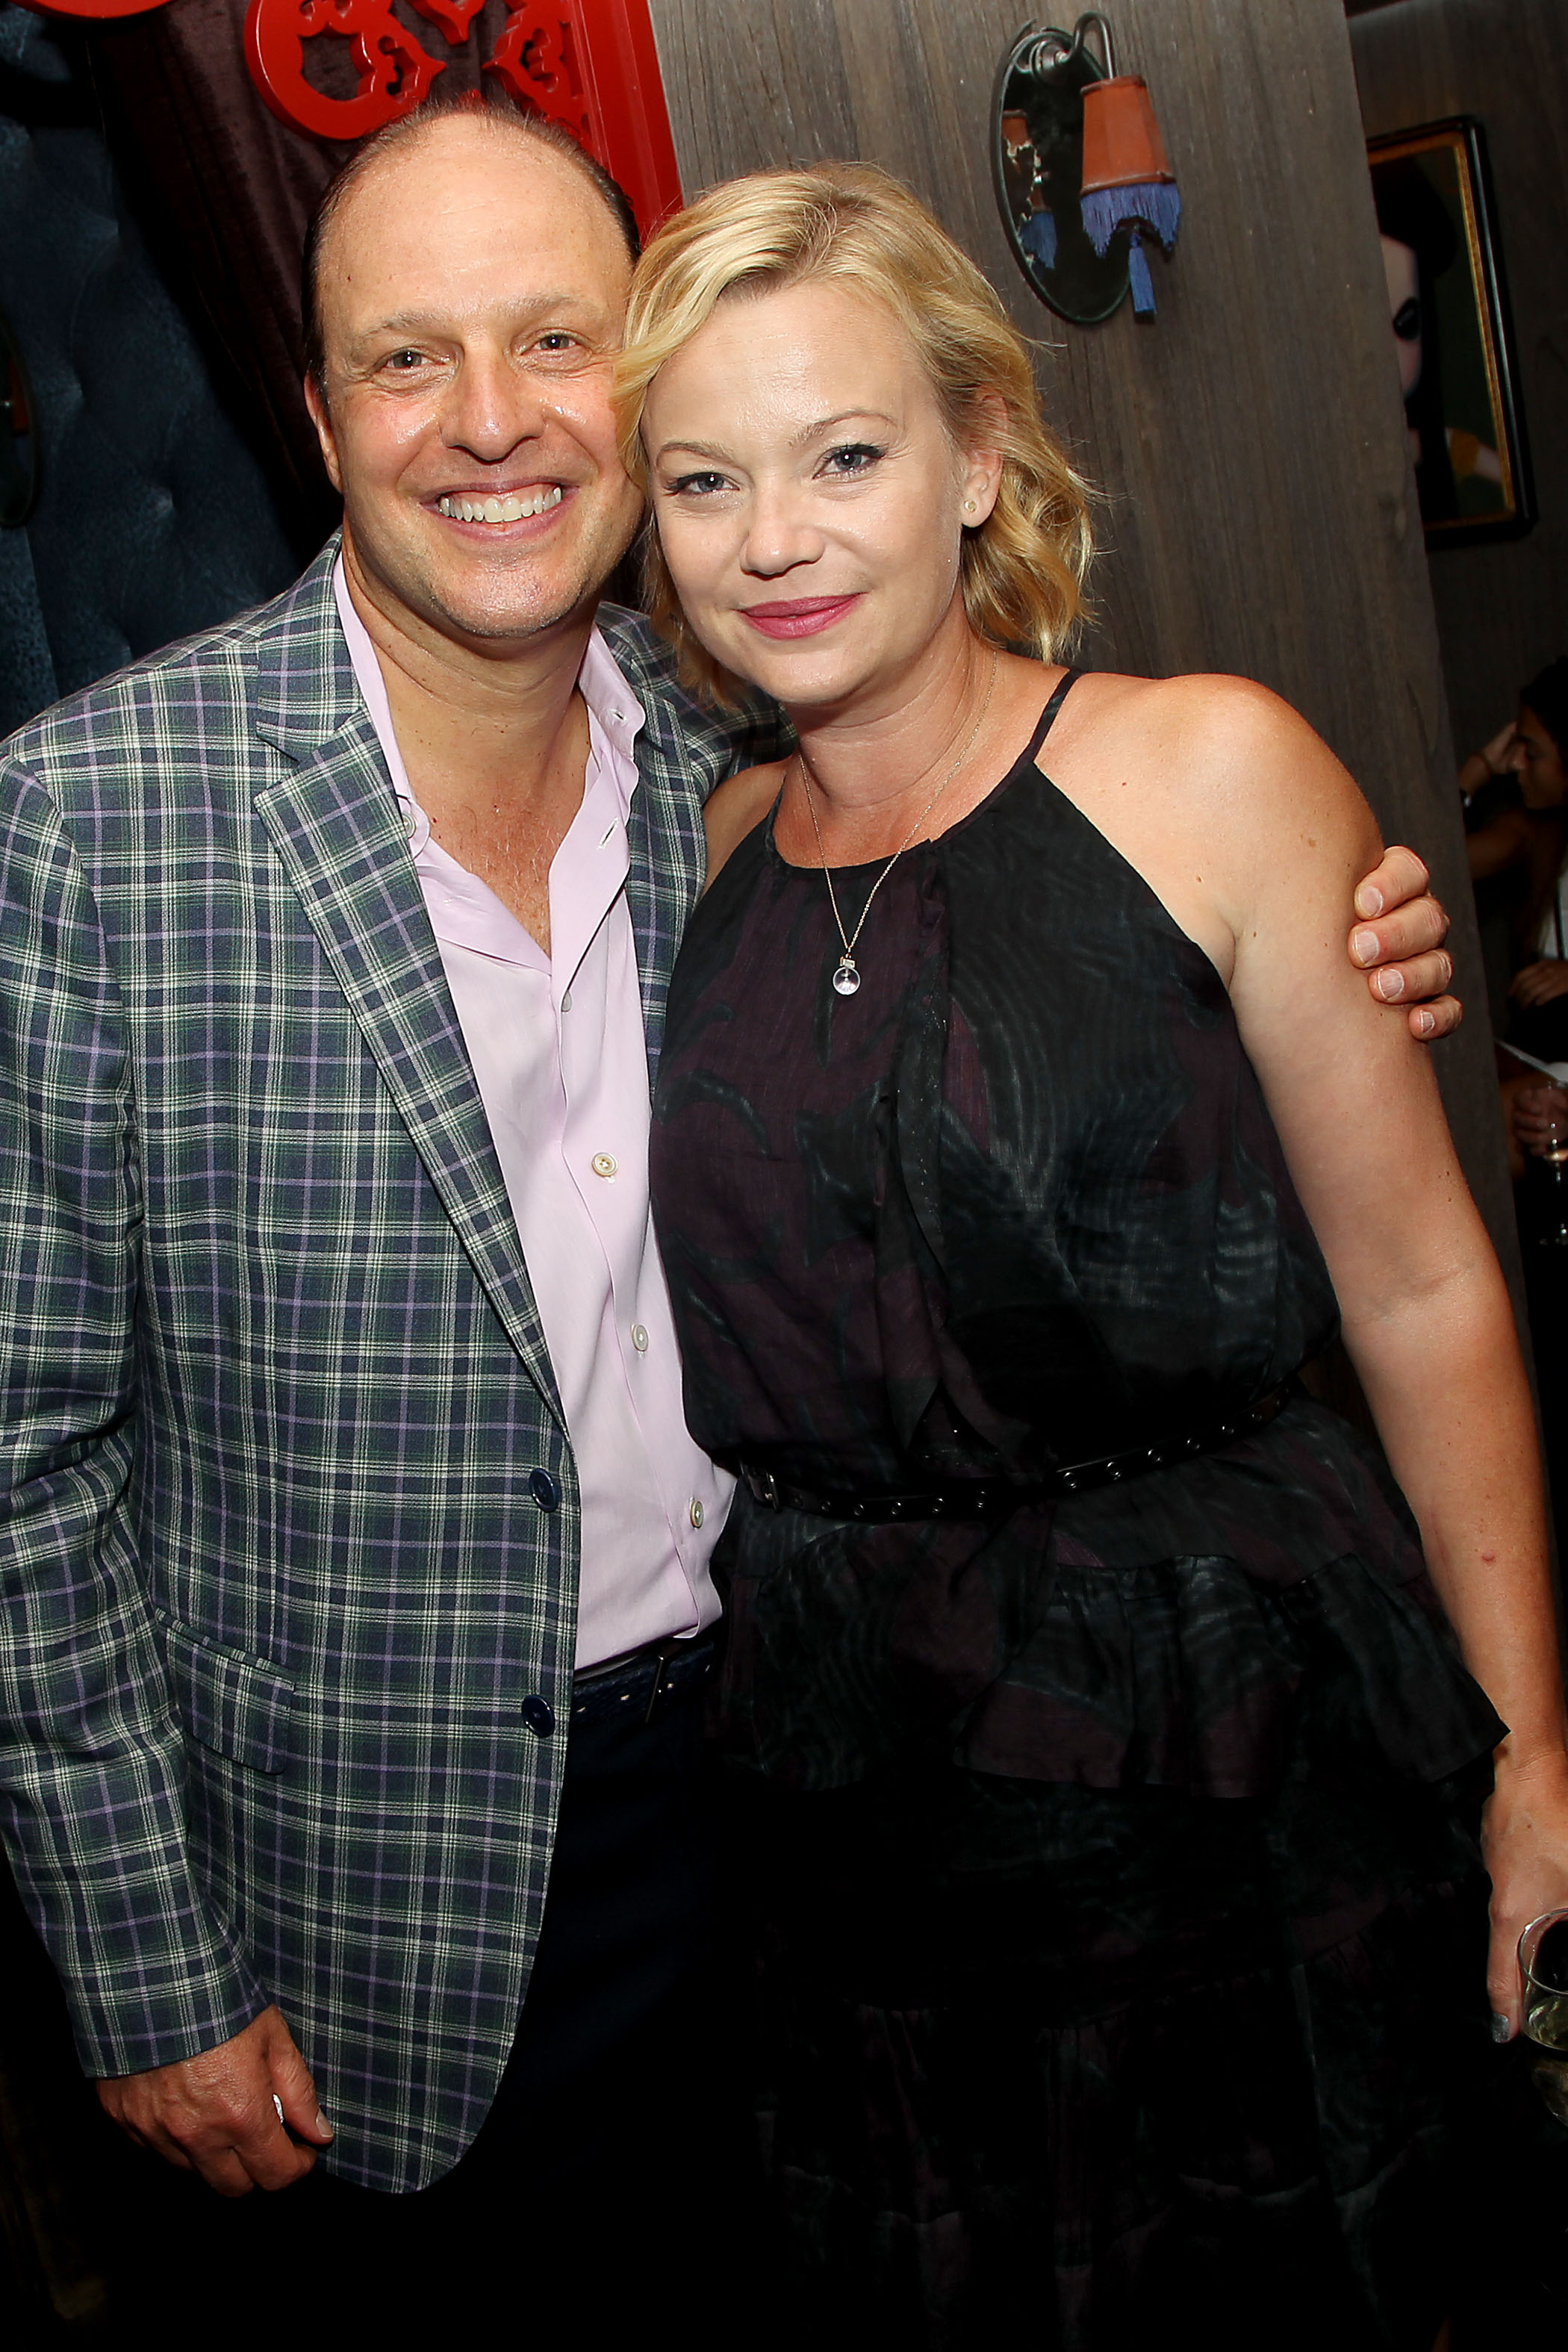 Morris S. Levy with actress, Samantha Mathis at the after party for the premiere of Affluenza.